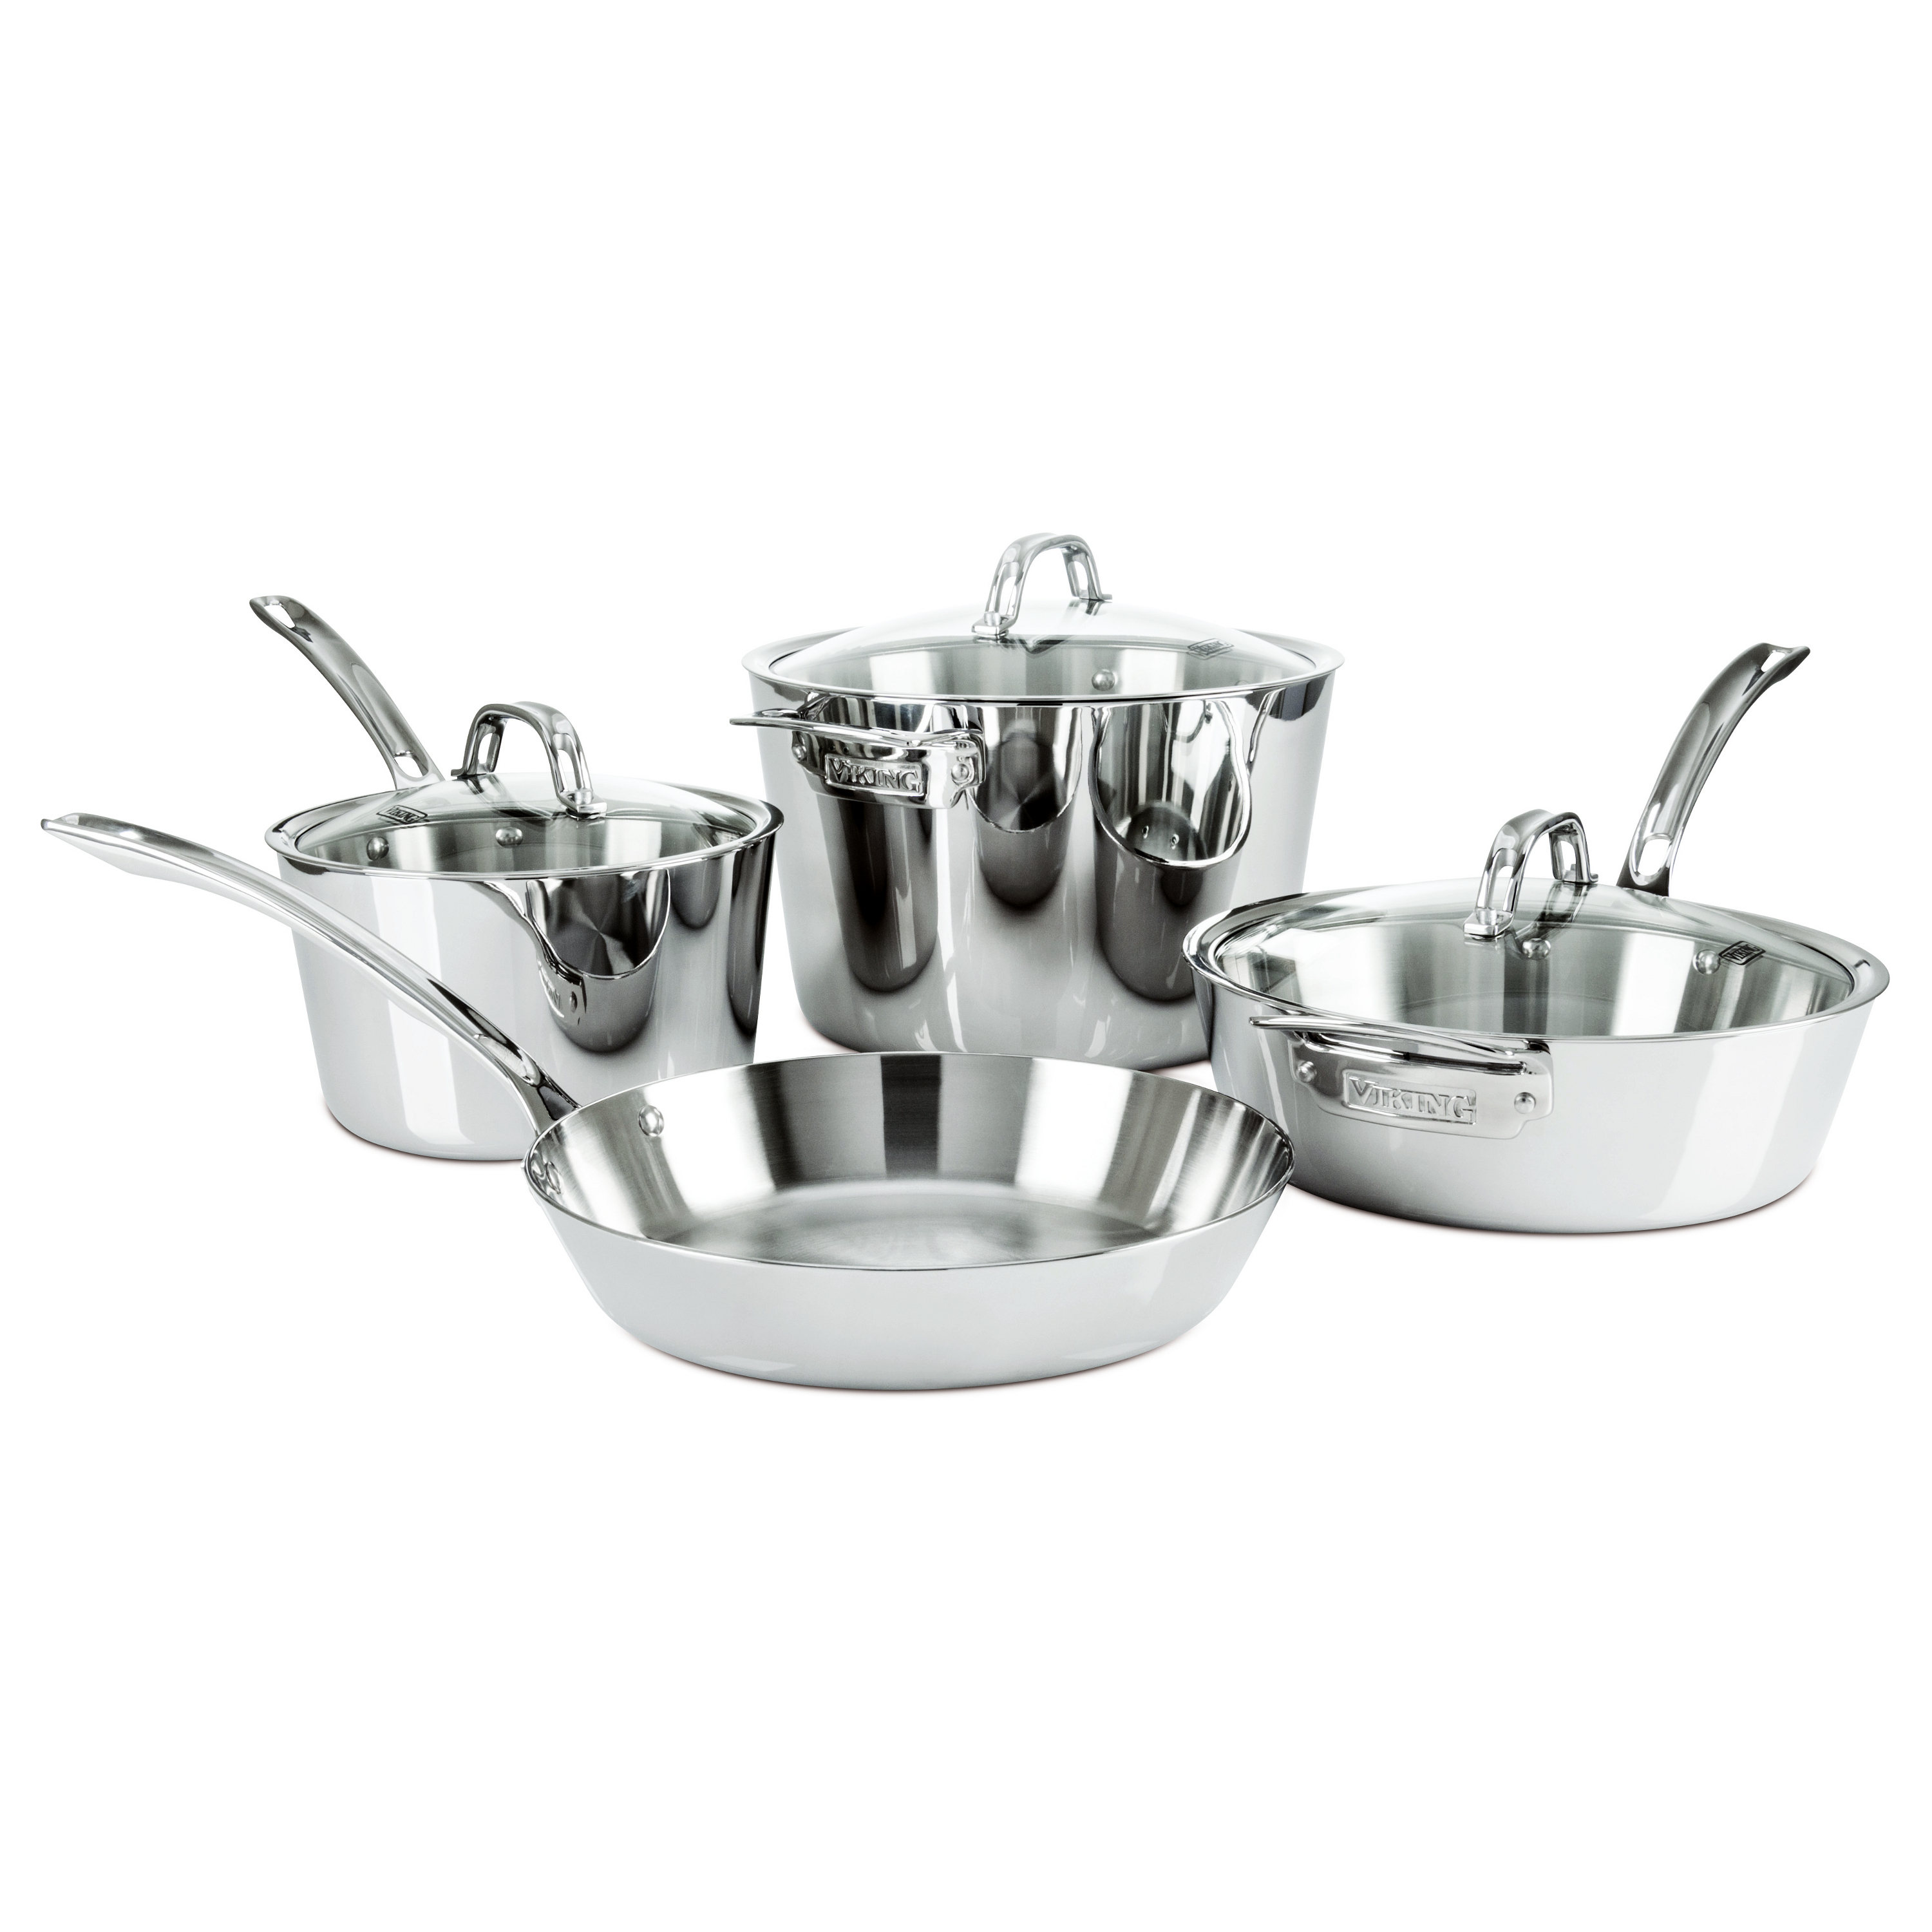 Viking Contemporary 7 Piece Cookware Set - image 1 of 6